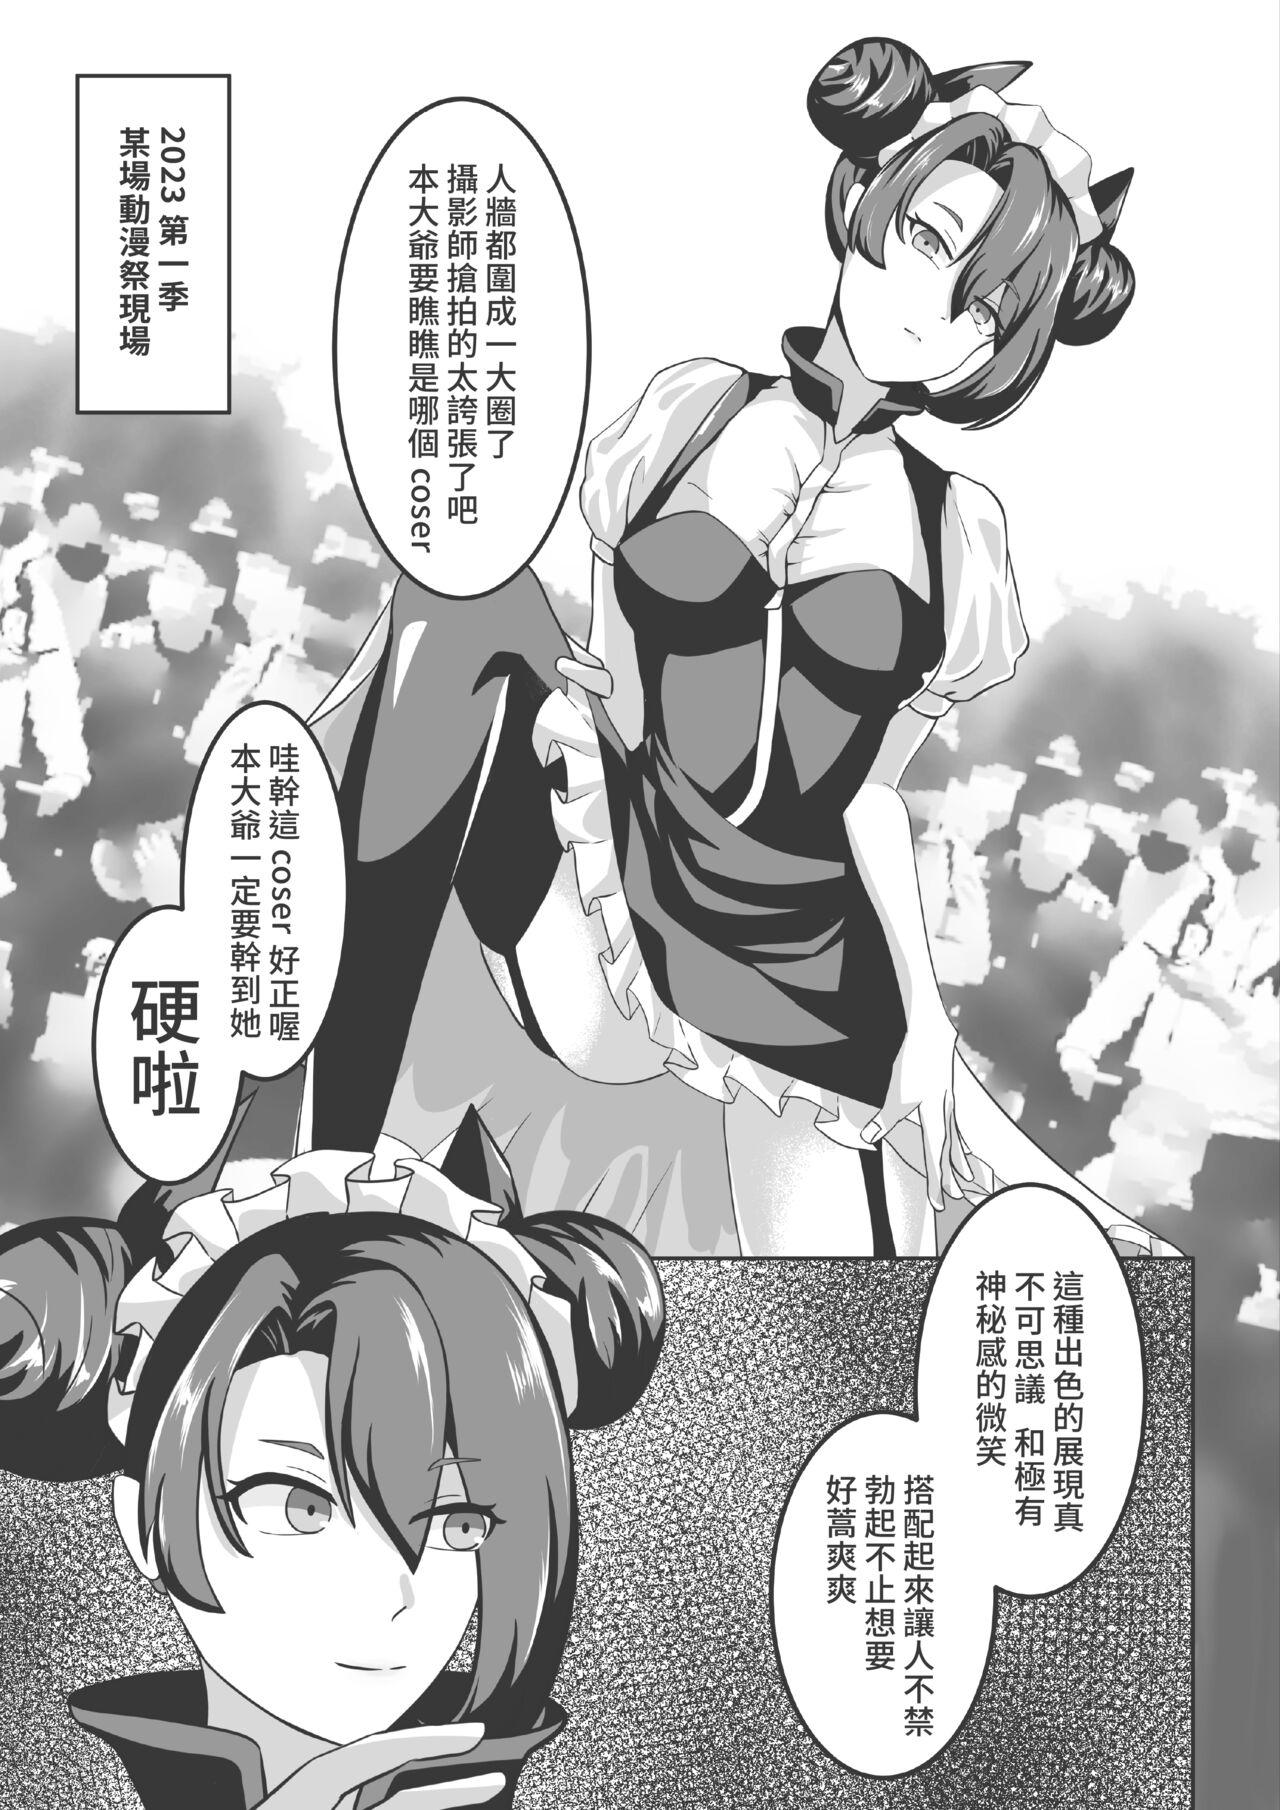 Cam Sex Sex with Agent - Girls frontline Smooth - Page 2